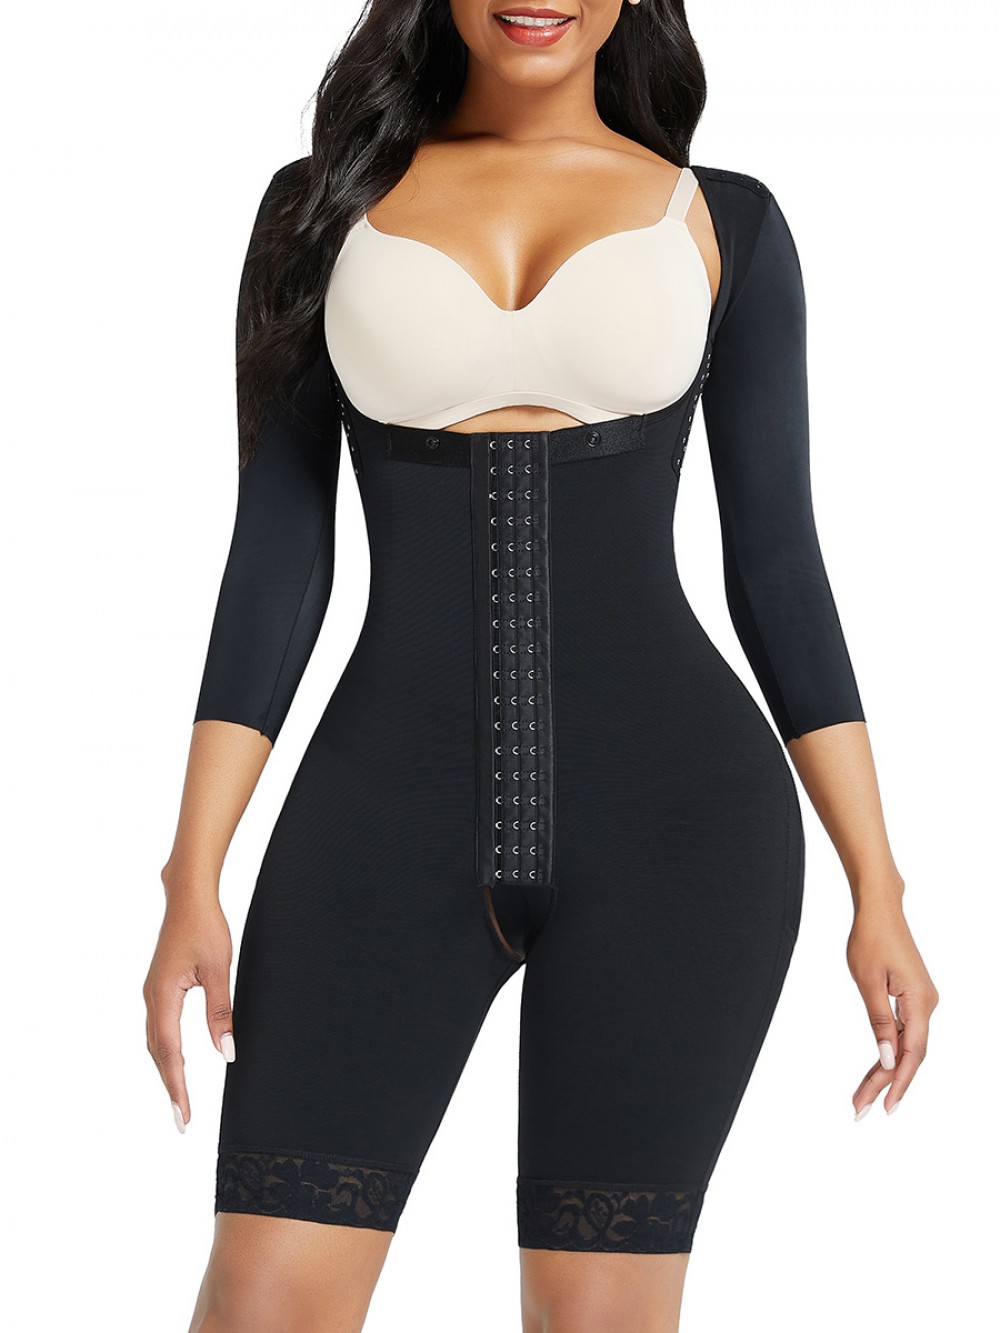 Black Lace Trim Hourglass Body Shaper With Sleeves Curve Shaper